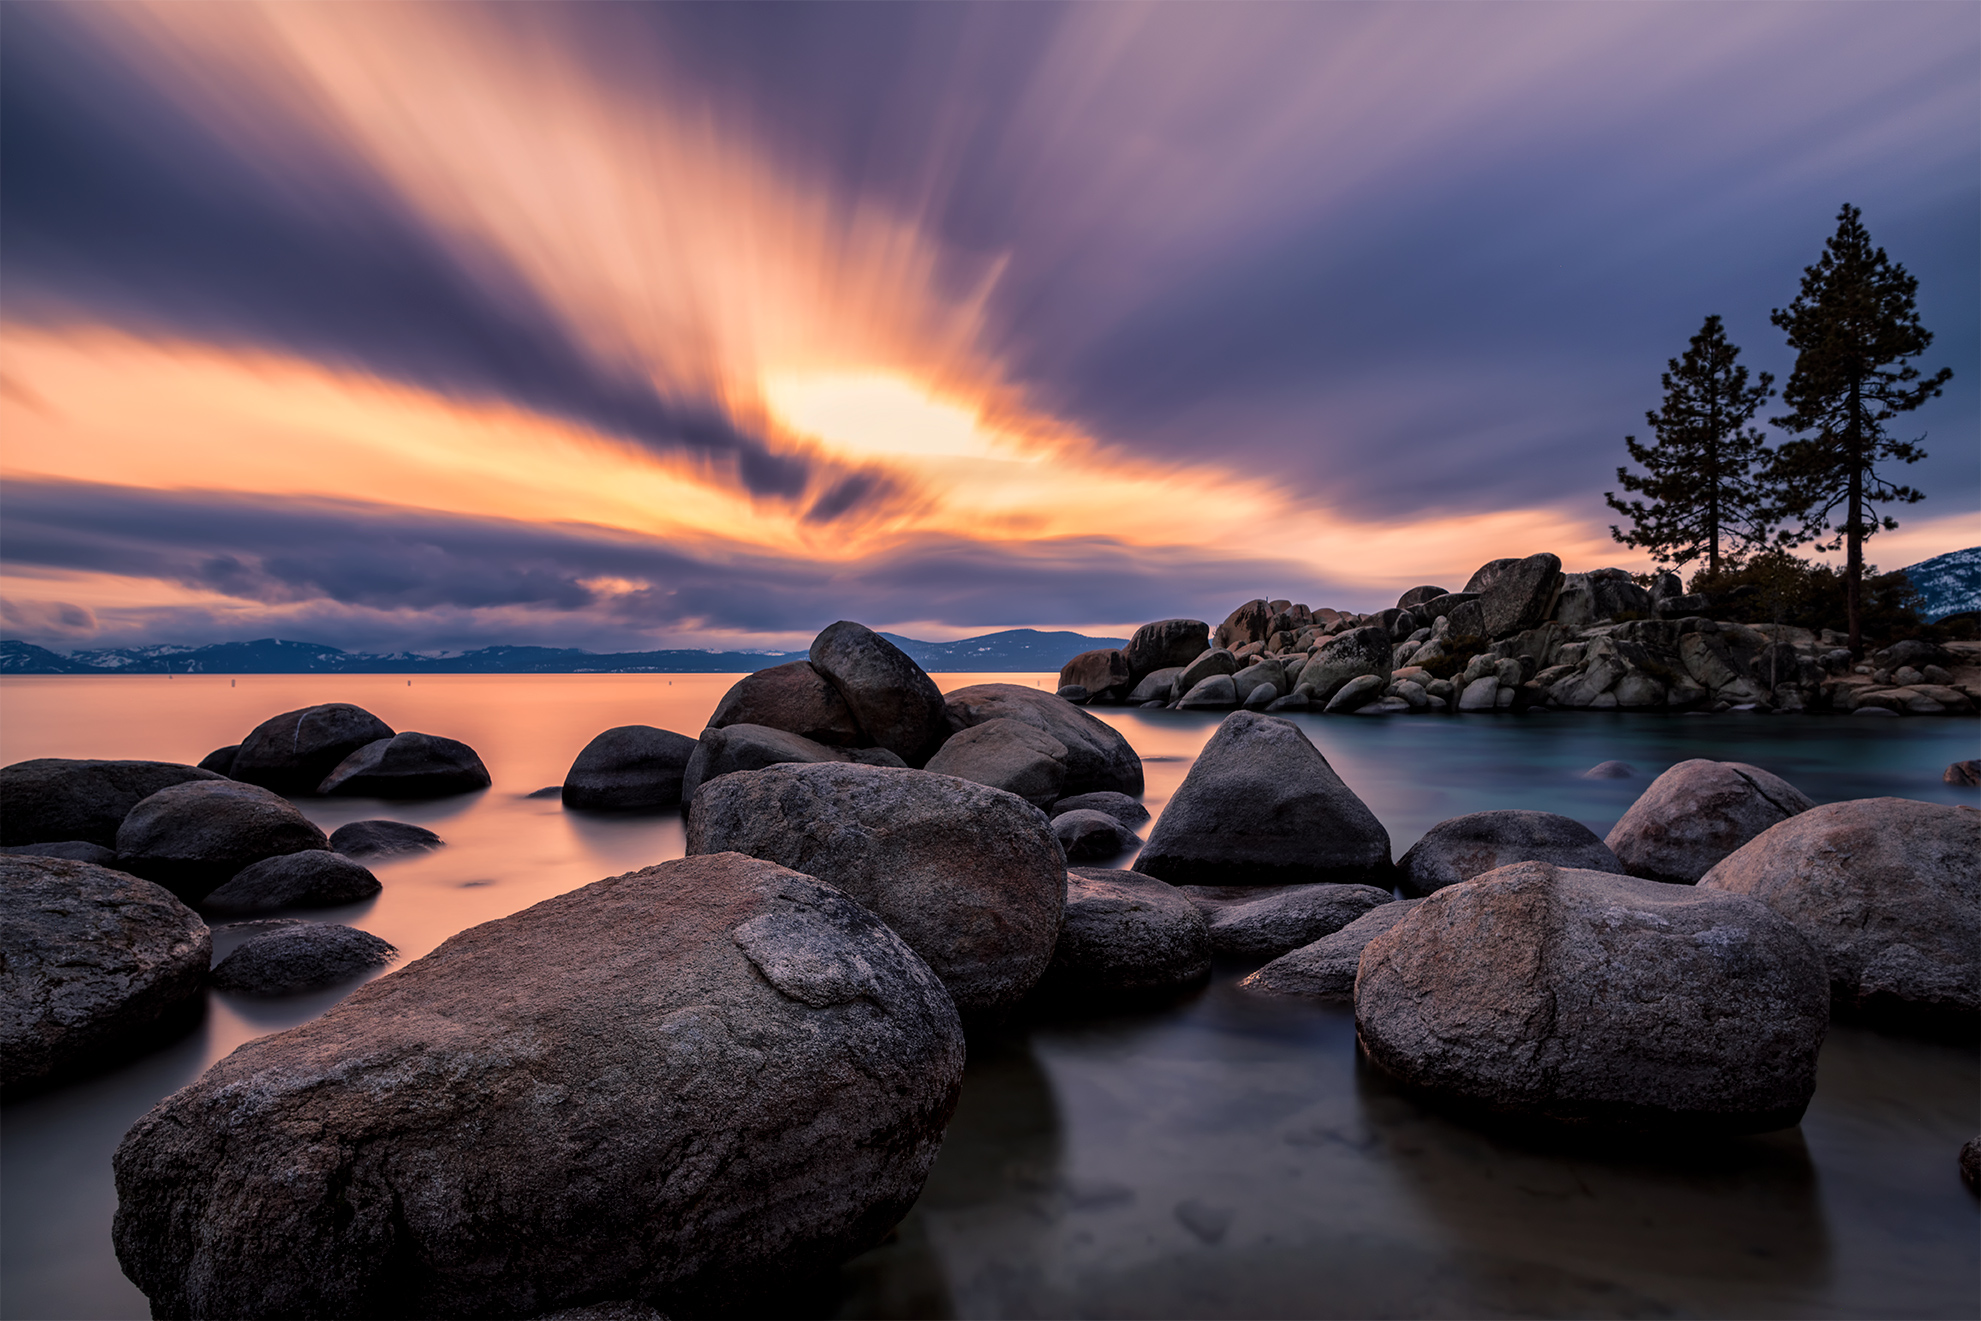 Sunrise from one of the beautiful rock coves in Lake Tahoe